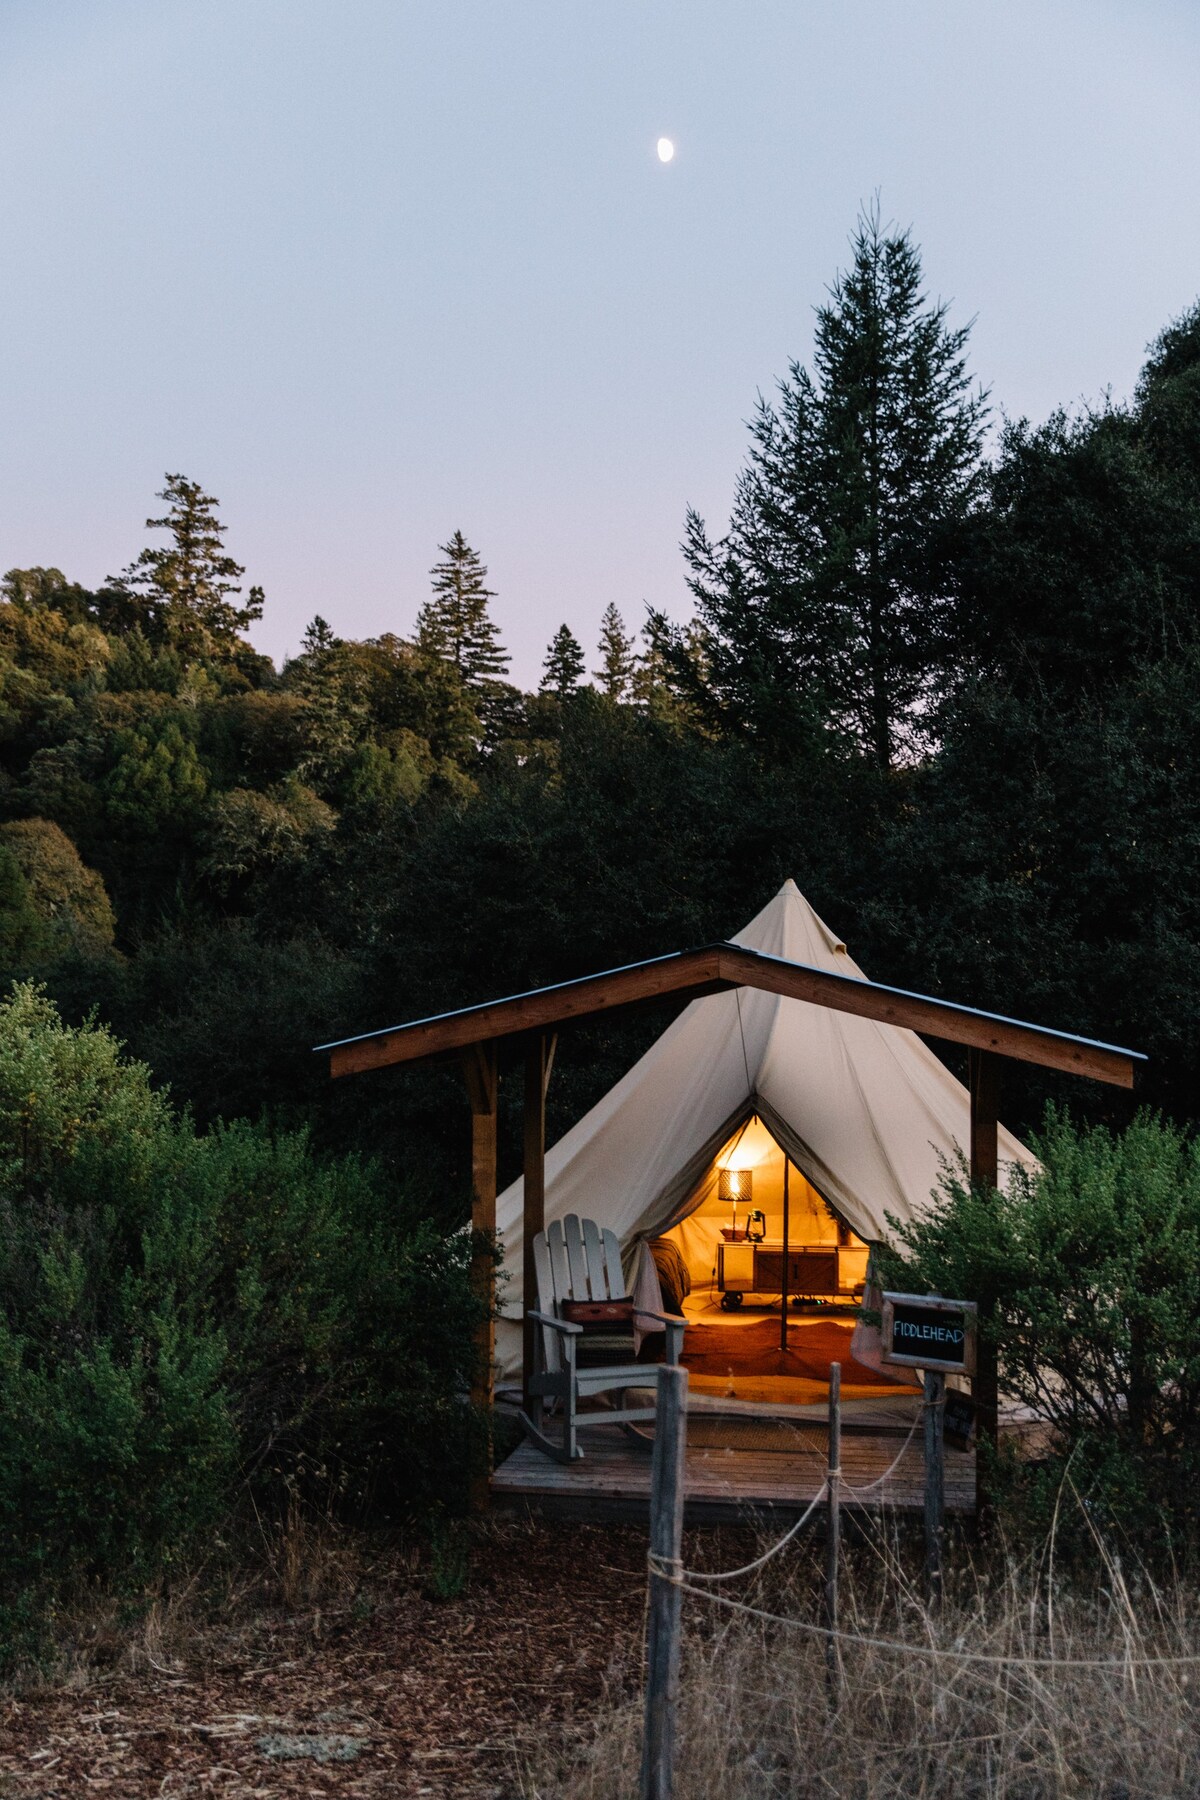 Pennyroyal & Thistle Glamping Tents